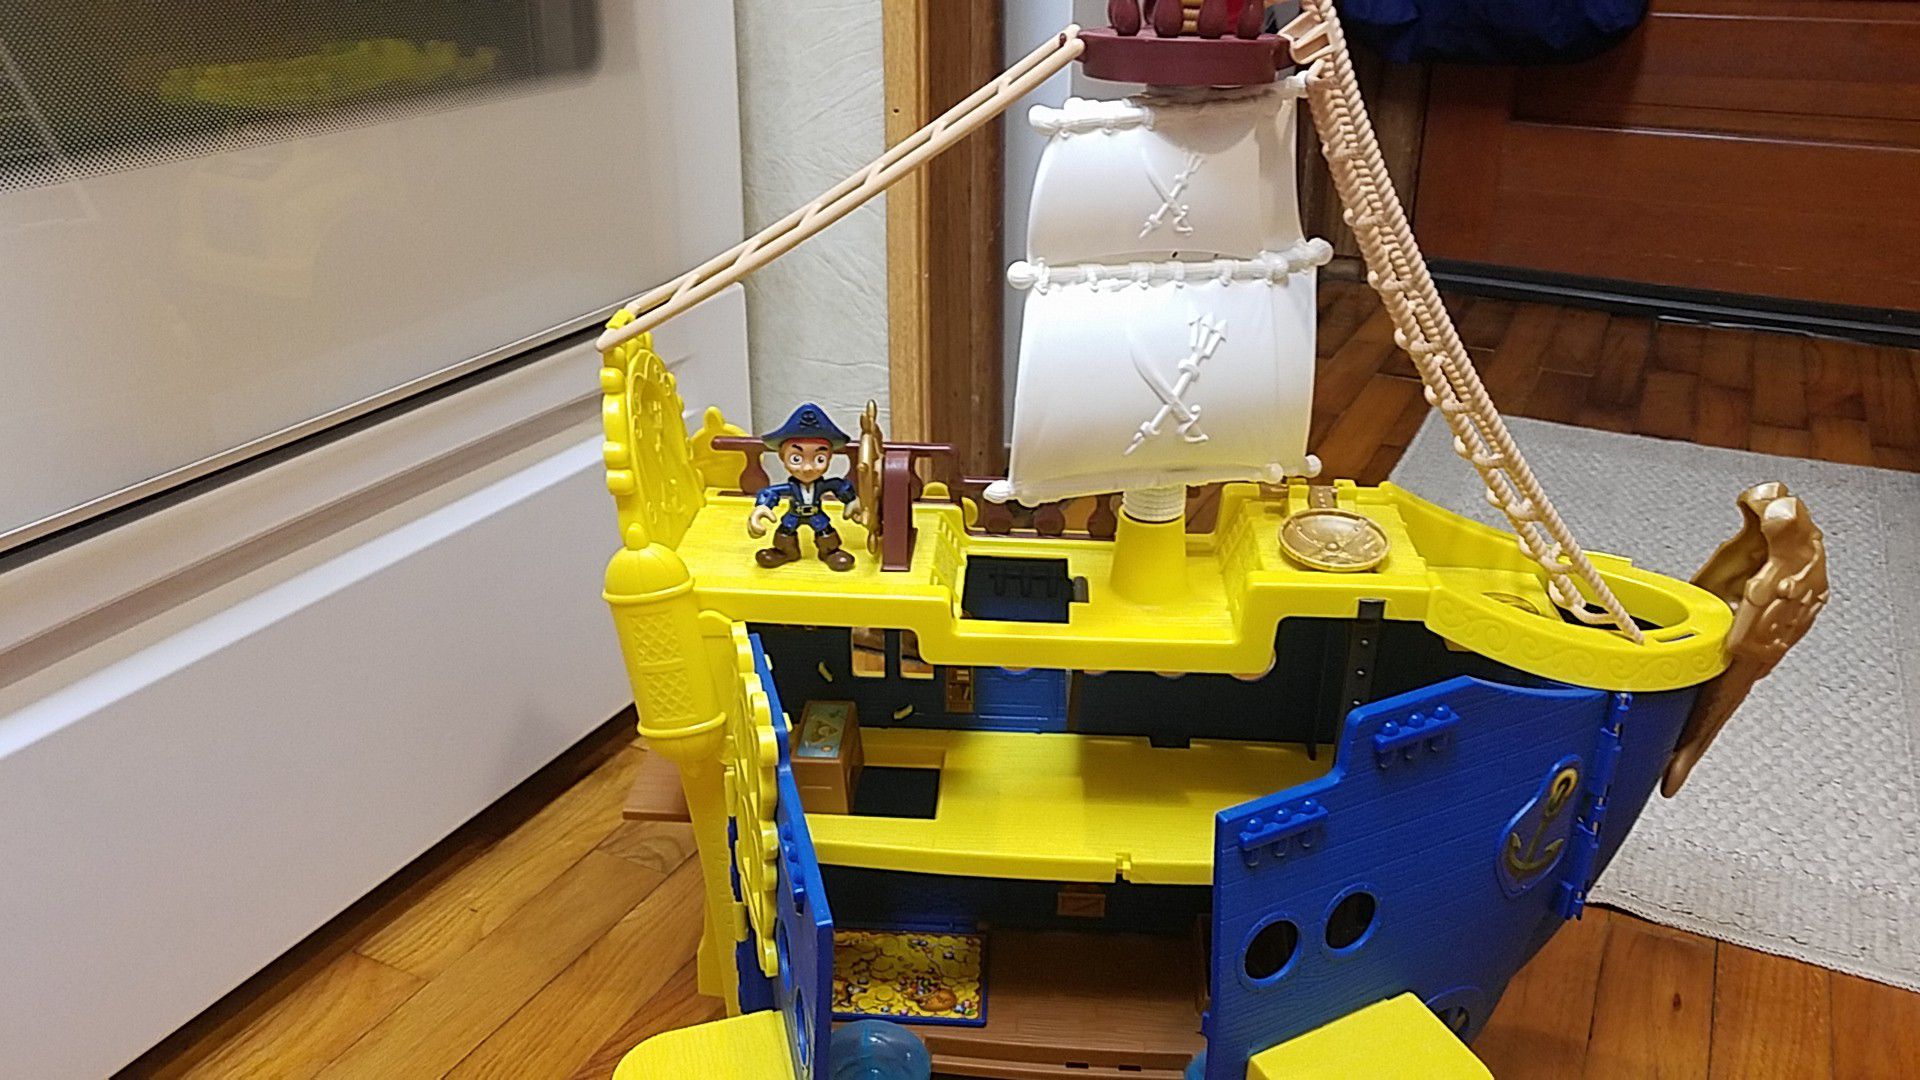 Jake and the Neverland pirate ship